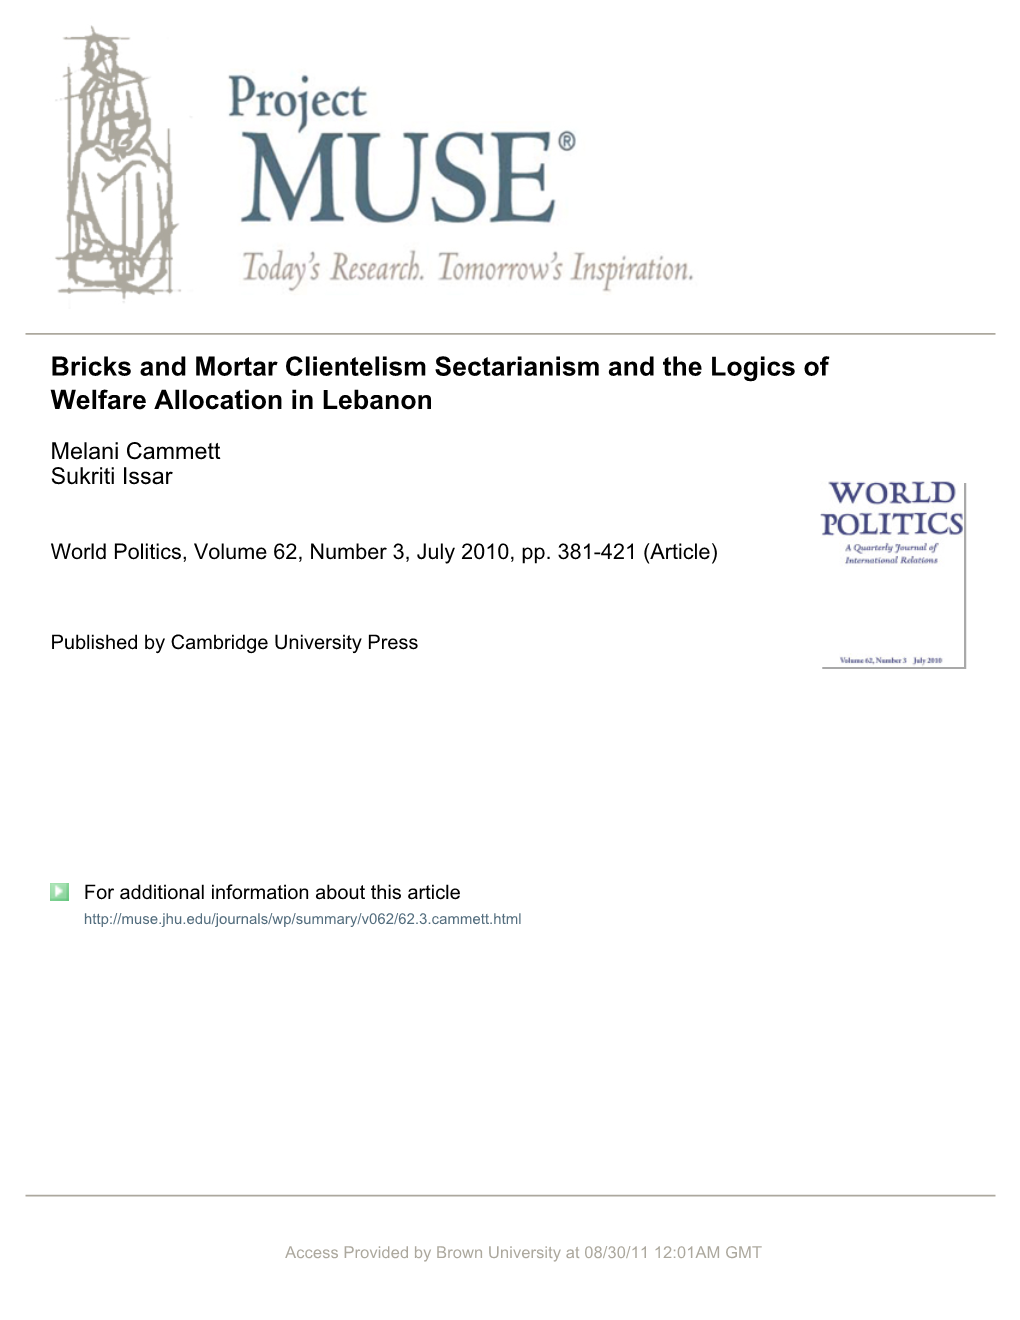 Bricks and Mortar Clientelism Sectarianism and the Logics of Welfare Allocation in Lebanon